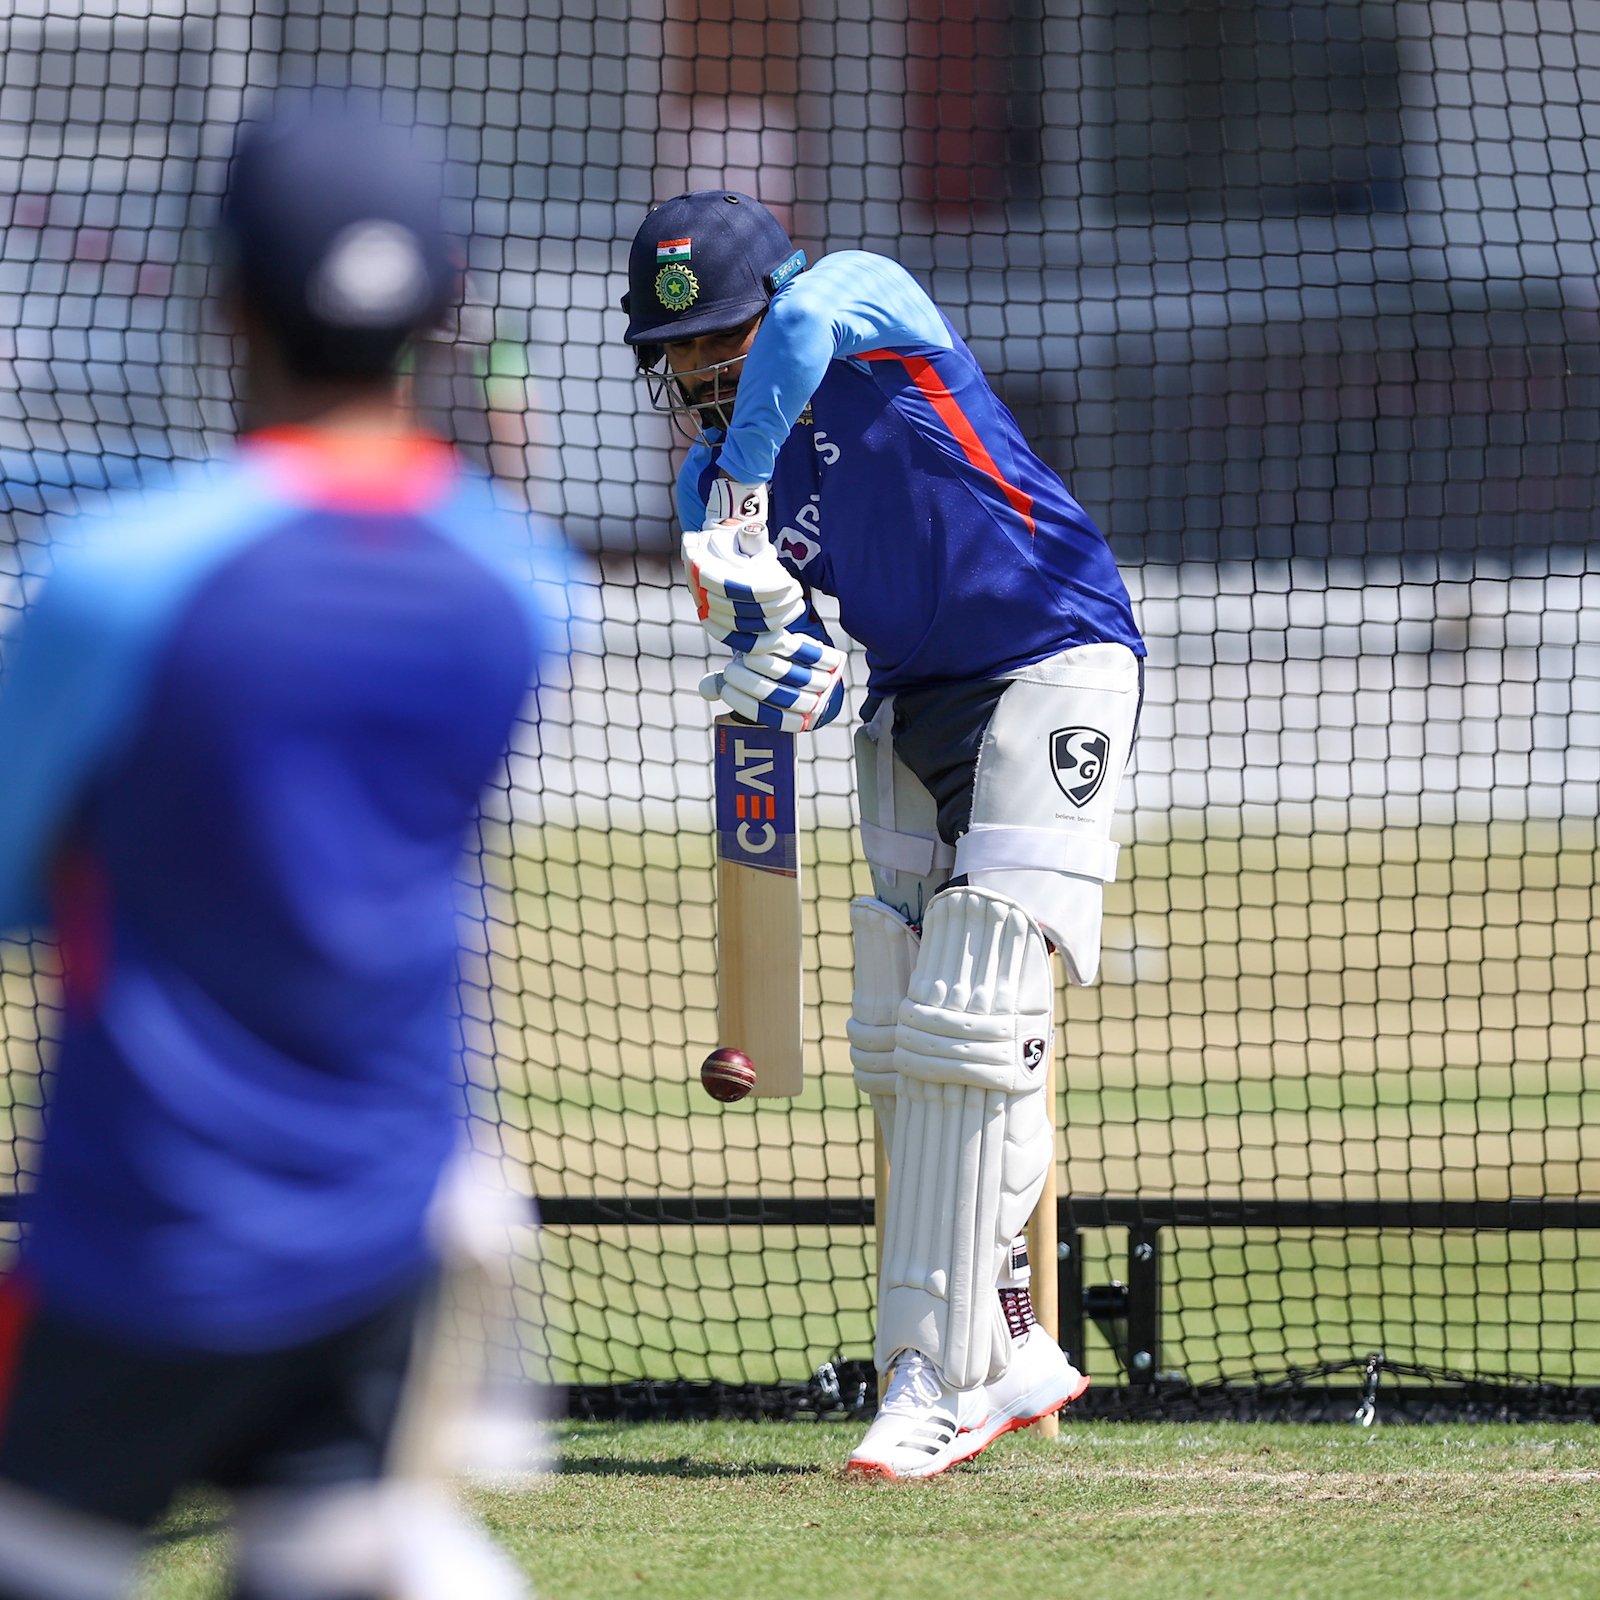 Rishabh Pant’s Fitness Is Not Up To Standard, And Rohit Sharma Is Not Either- Danish Kaneria